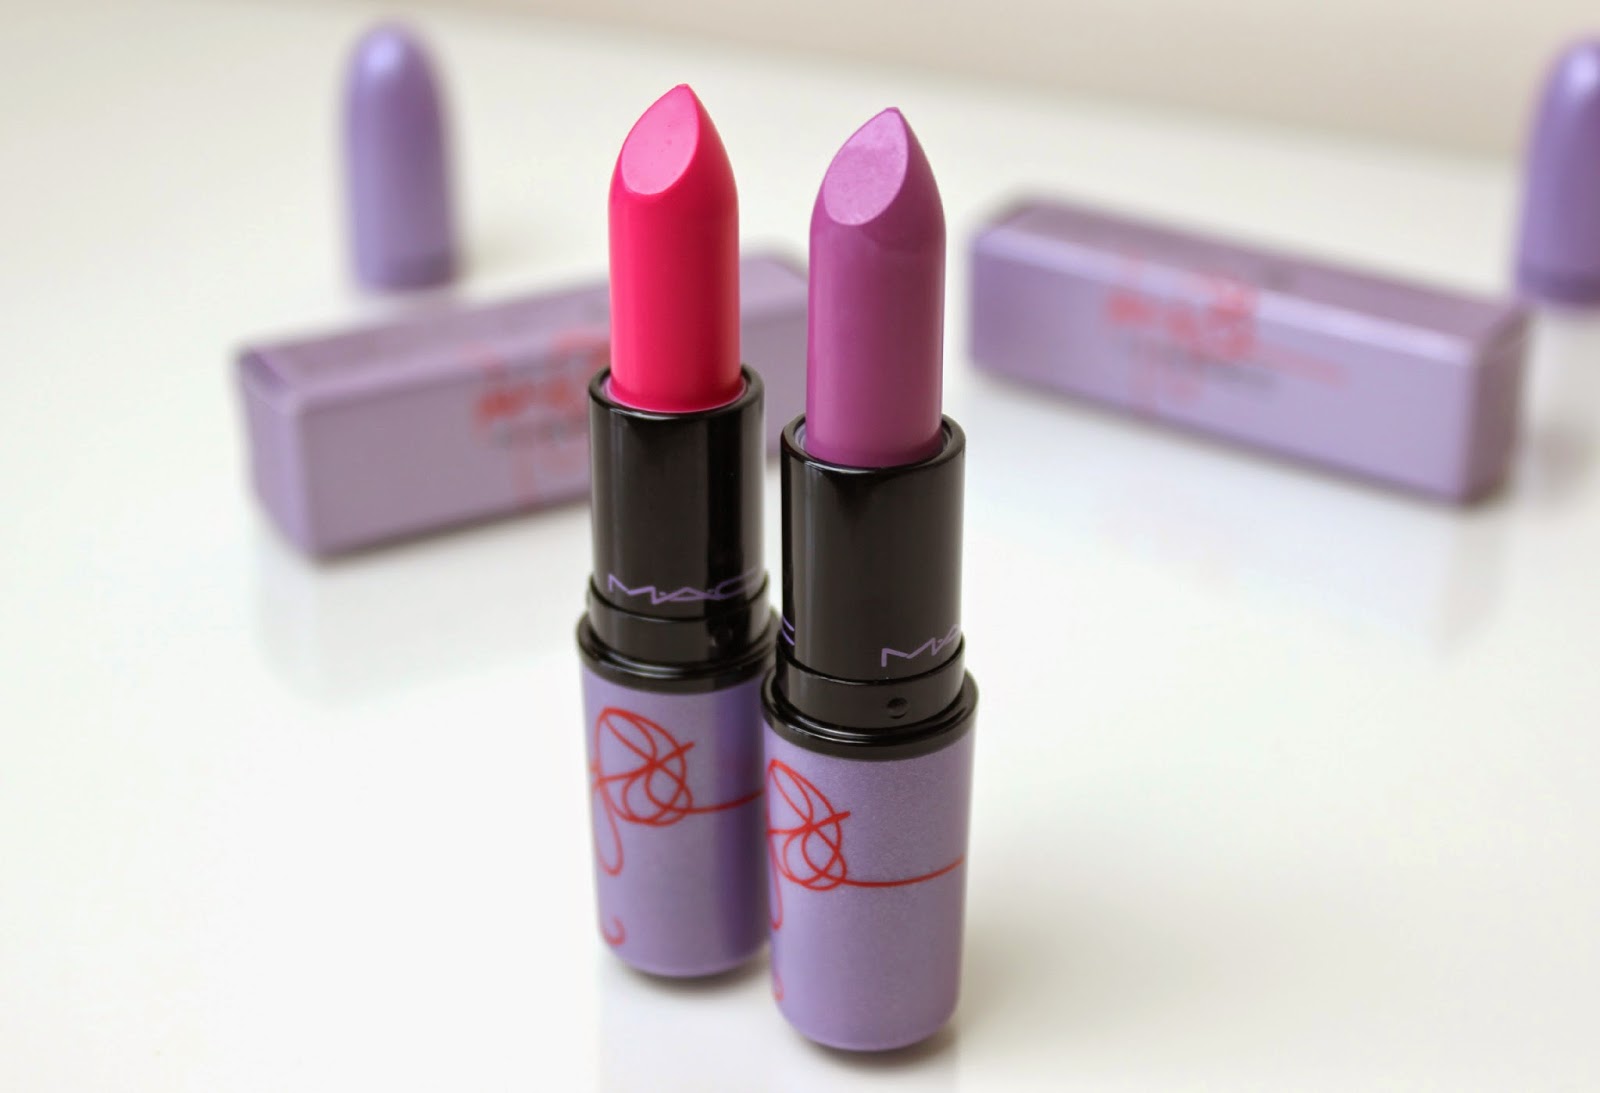 A picture of the Kelly Yum-Yum & Dodgy Girl lipsticks from the Kelly & Sharon Osbourne for MAC collection.